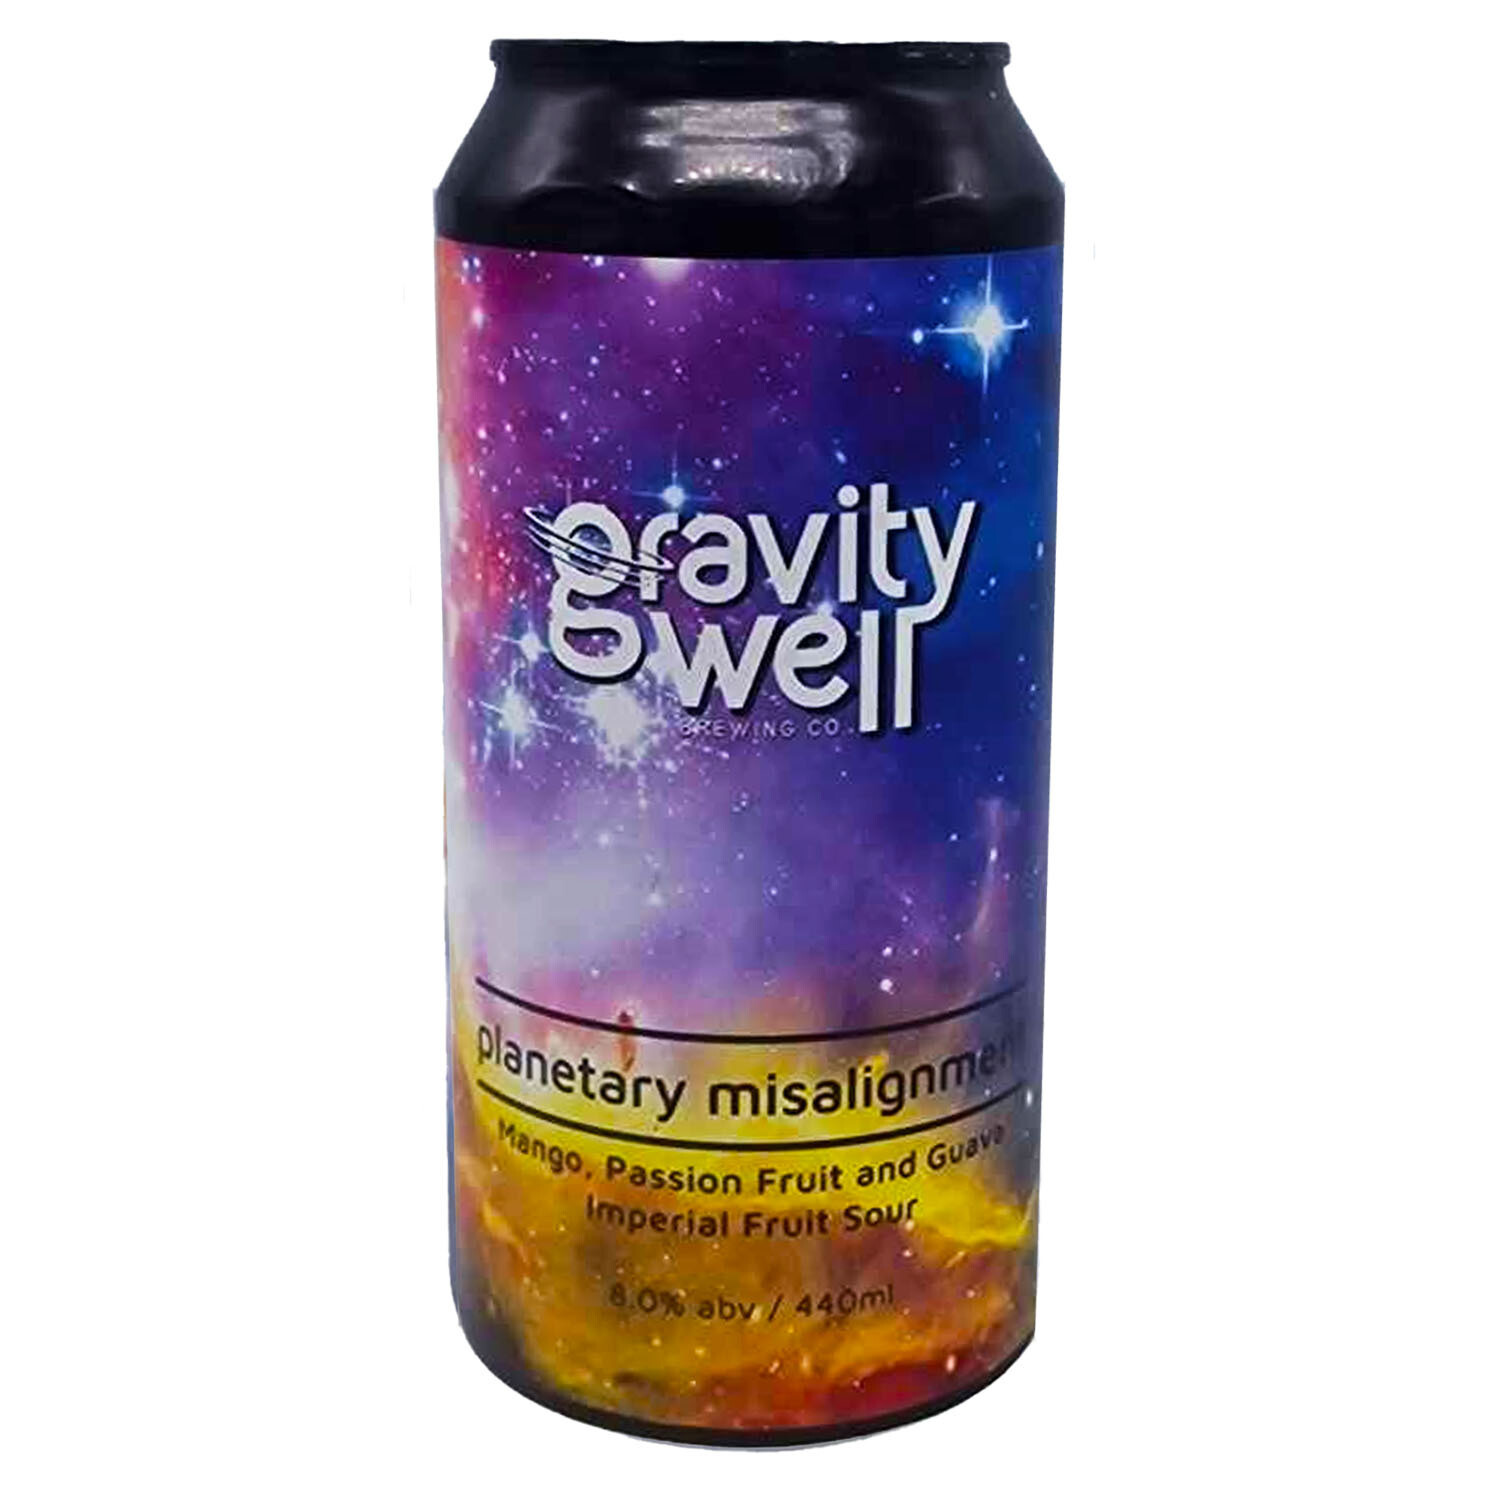 Gravity Well Planetary Misalignment Mango Passion Fruit & Guava Sour